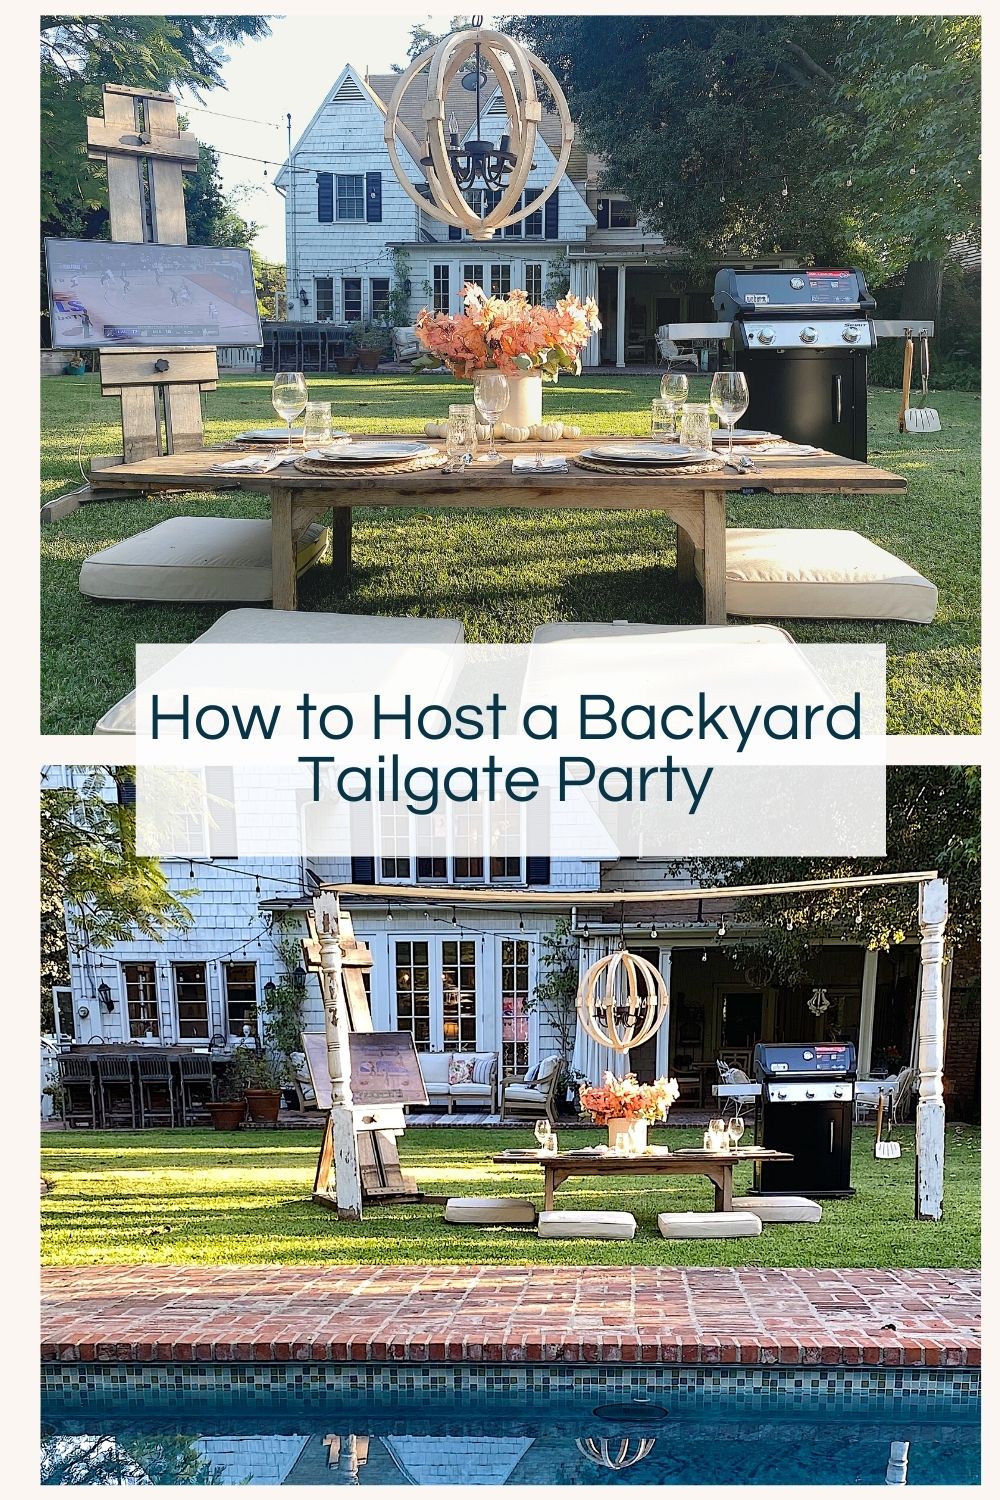 I am so excited to share the backyard tailgate party I created in our back yard. It was the perfect place to watch all of our favorite sports playoff games and enjoy some fabulous grilled food.